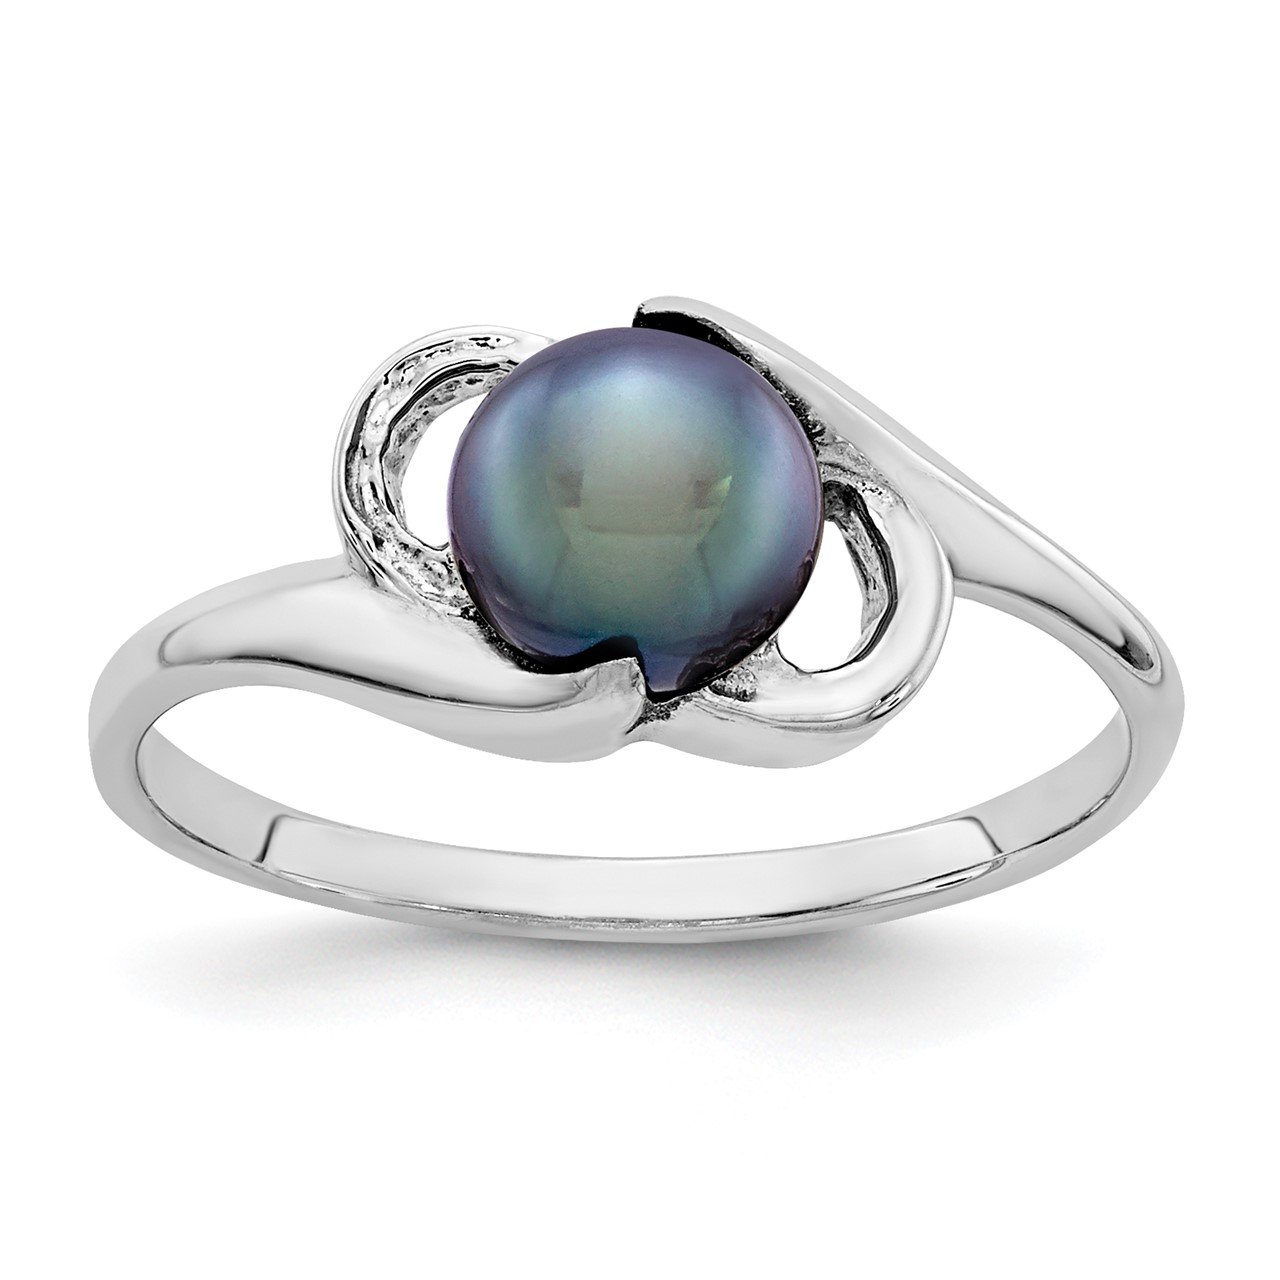 14k White Gold 5.5mm Black FW Cultured Pearl ring-0